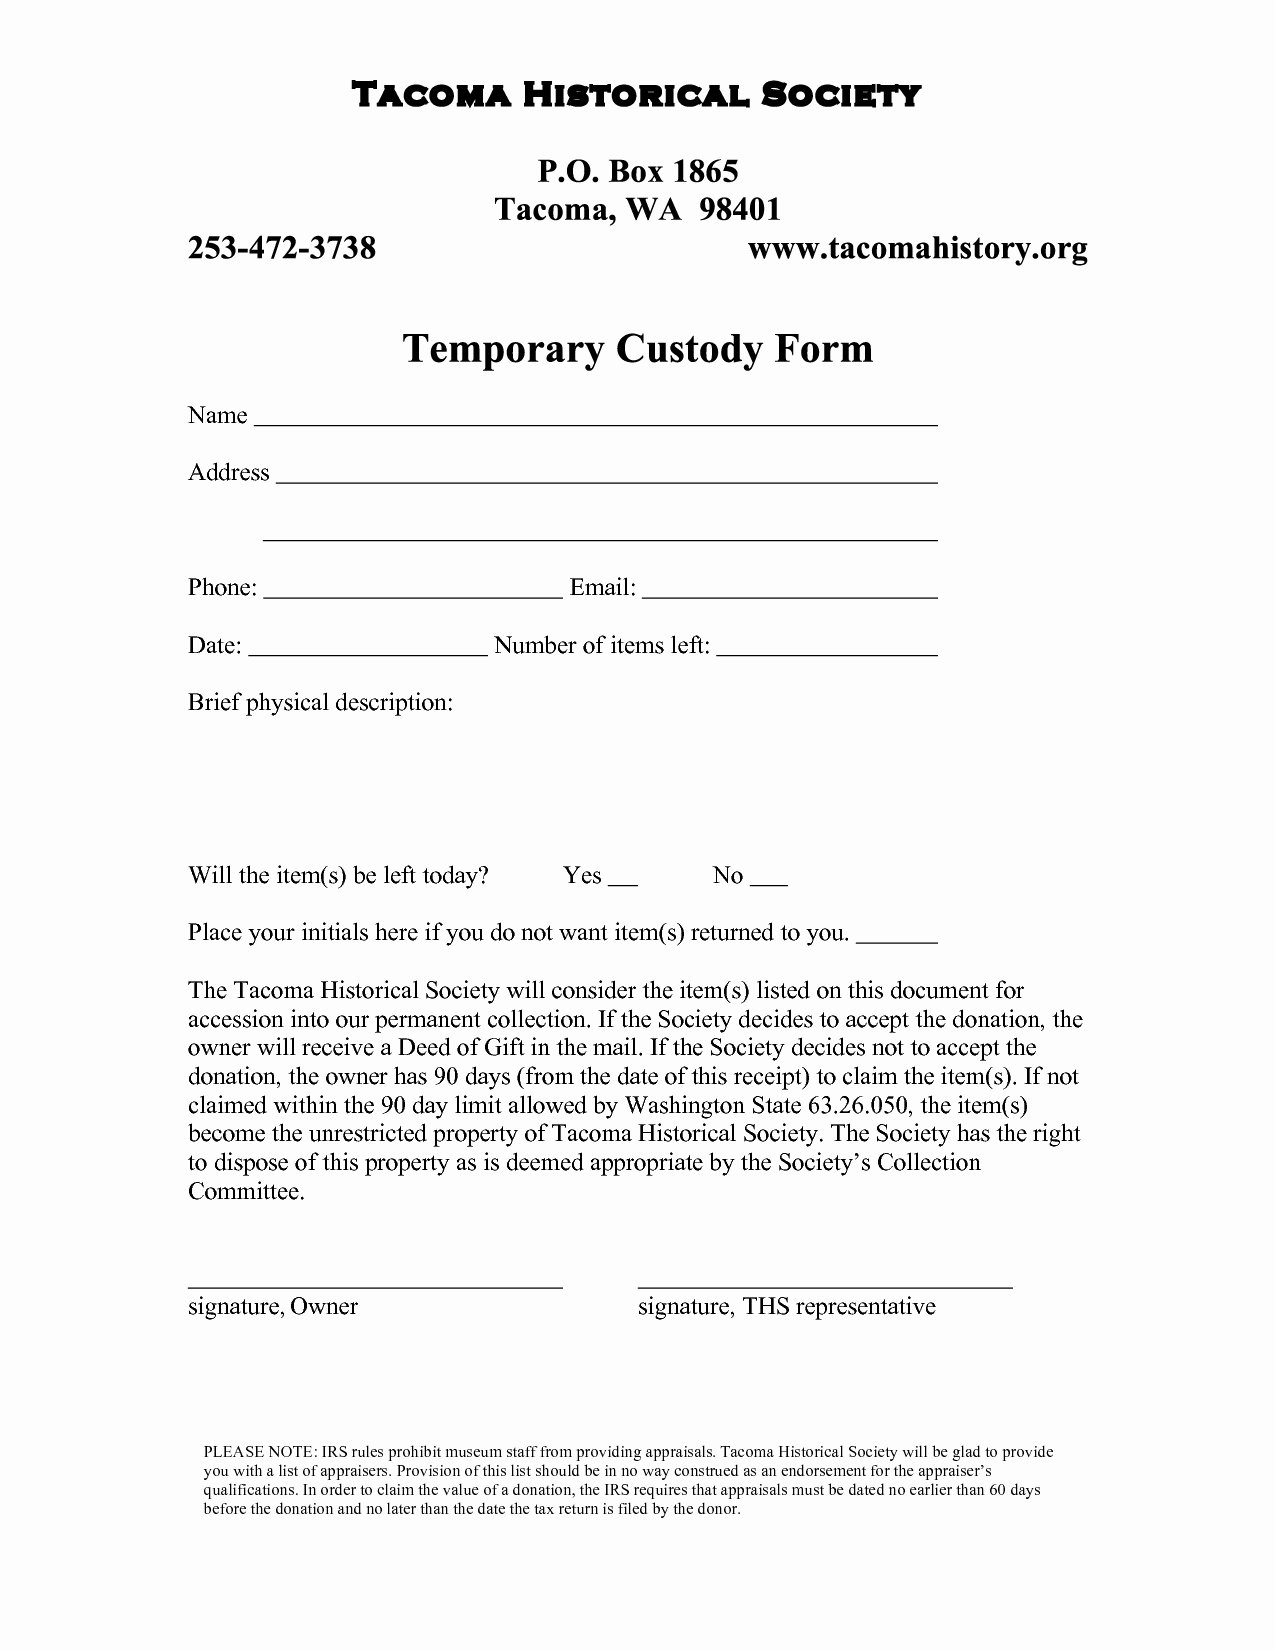 Free Temporary Guardianship form Best Of Printable Custody Agreement forms Perfect Best S